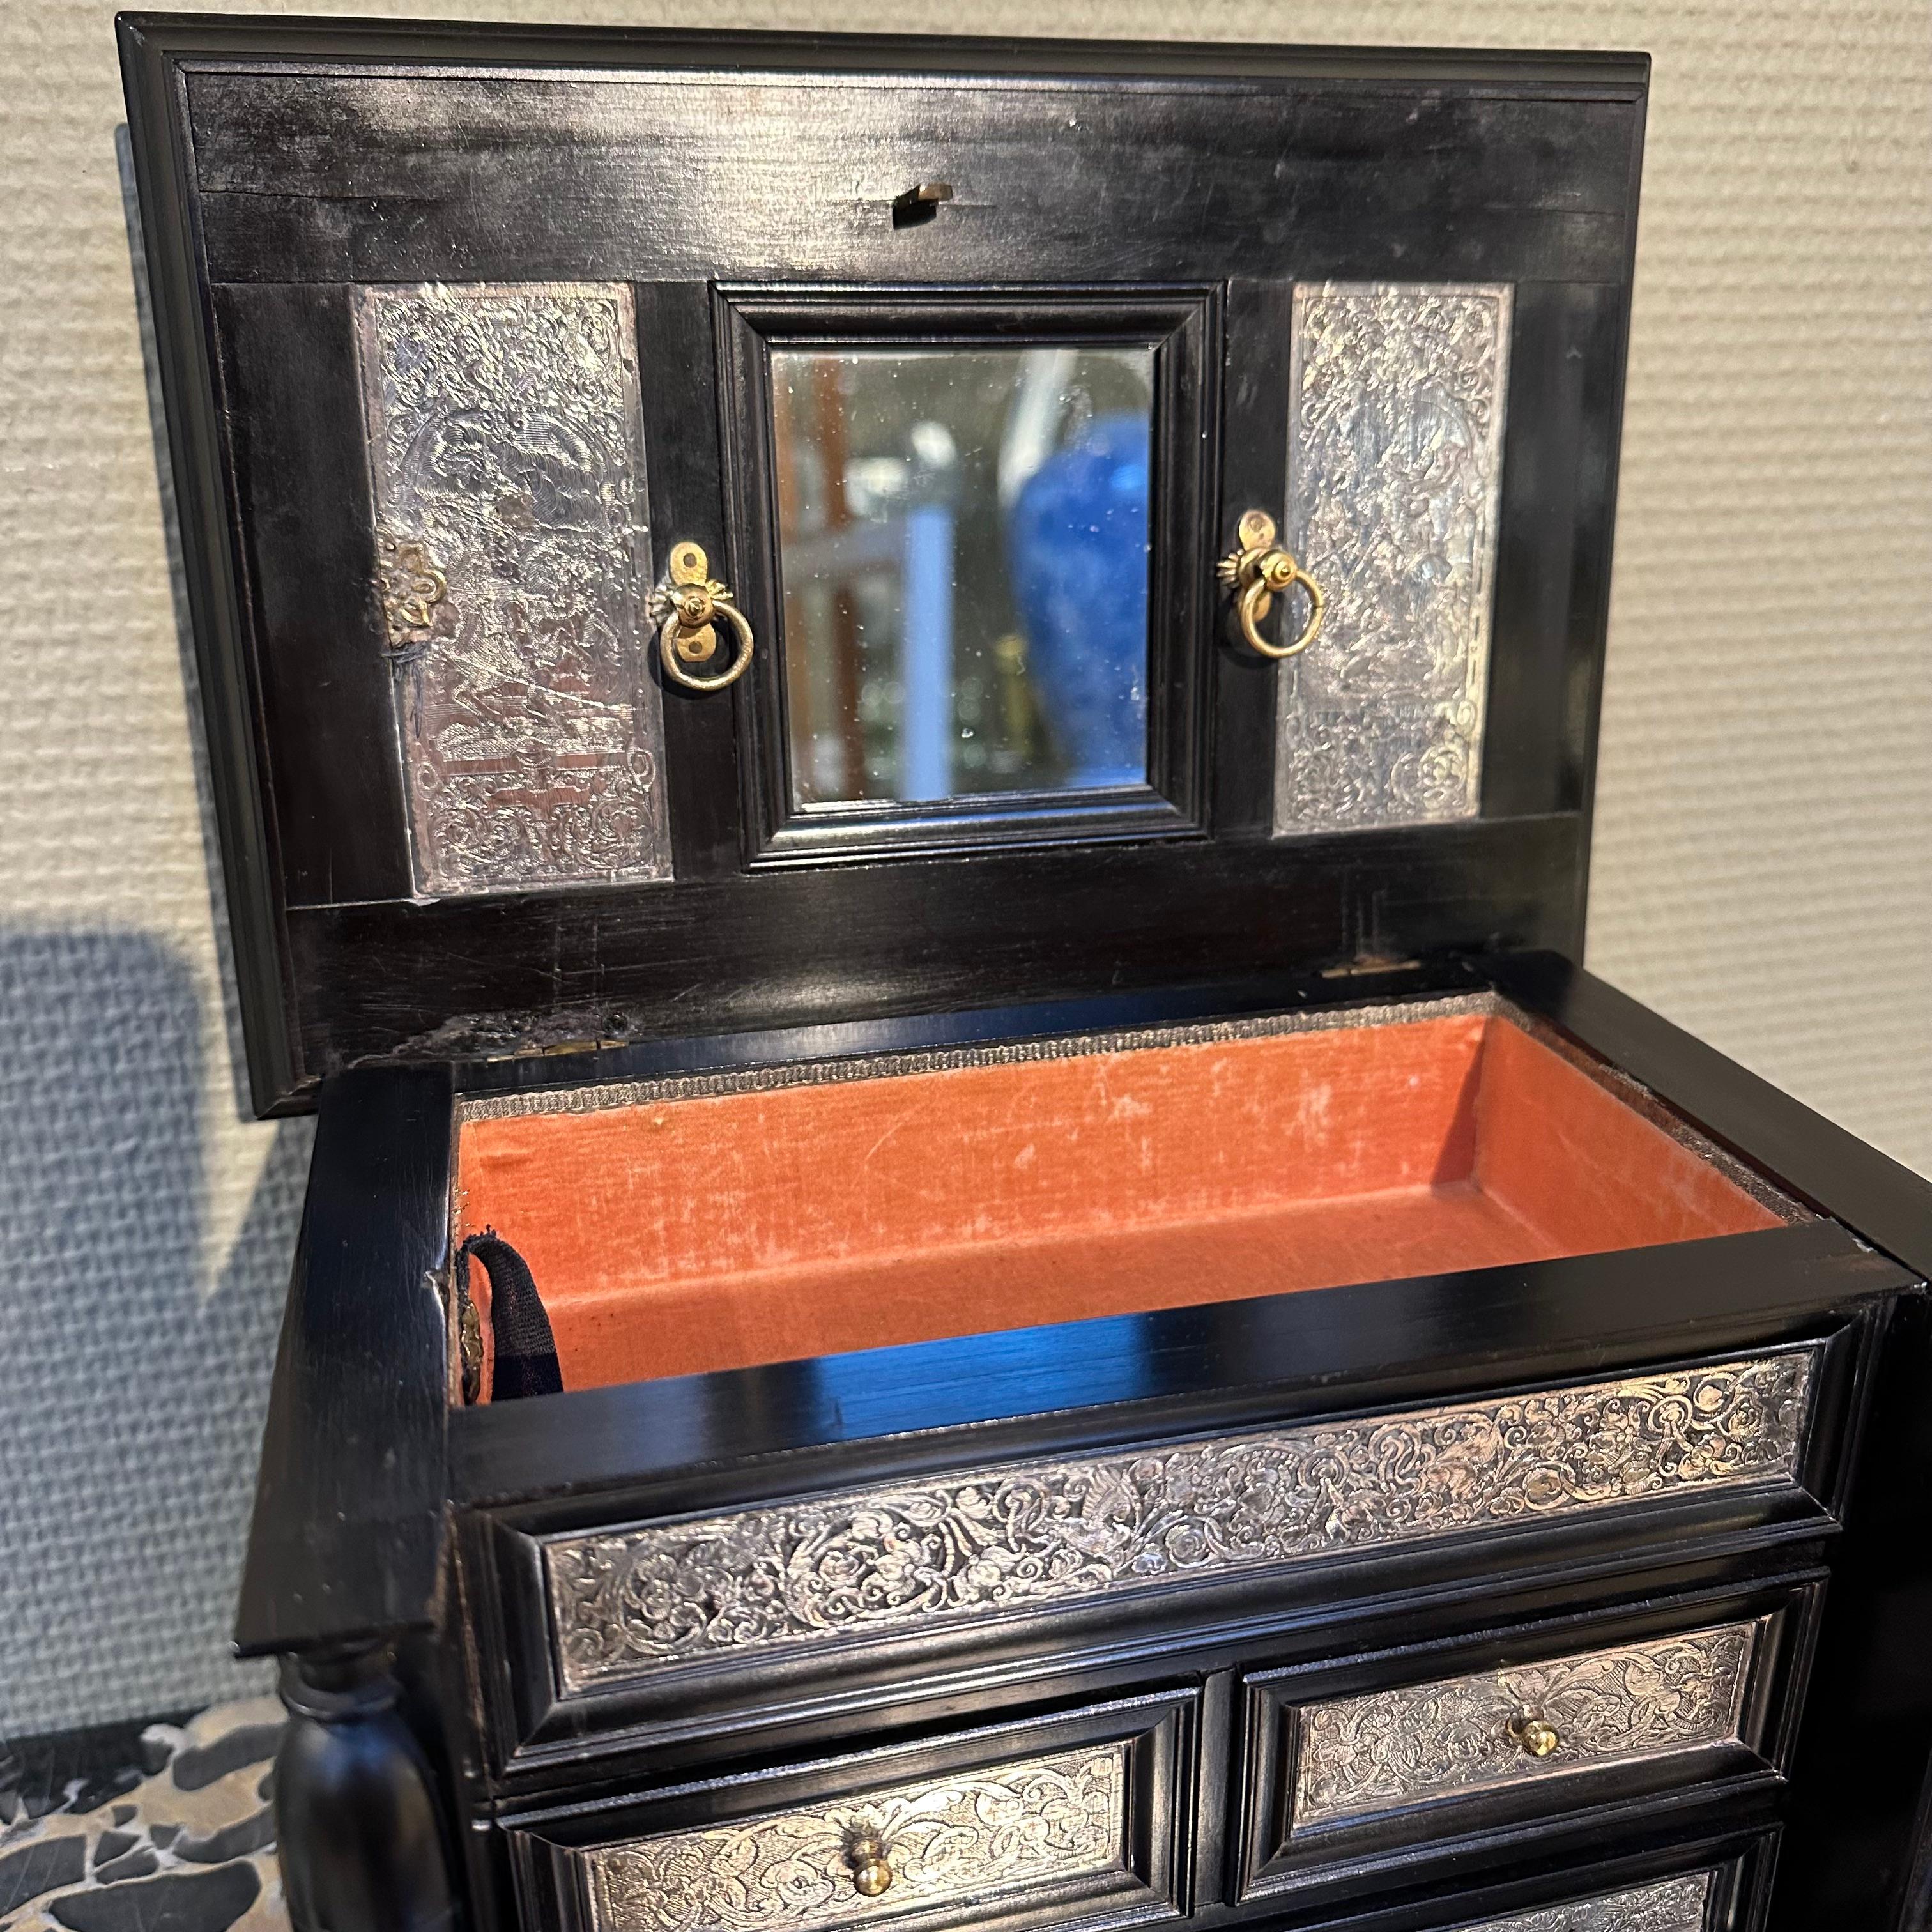 Rare 17th Century Baroque Ebony with Silver Cabinet, Antwerp, Wunderkammer For Sale 1